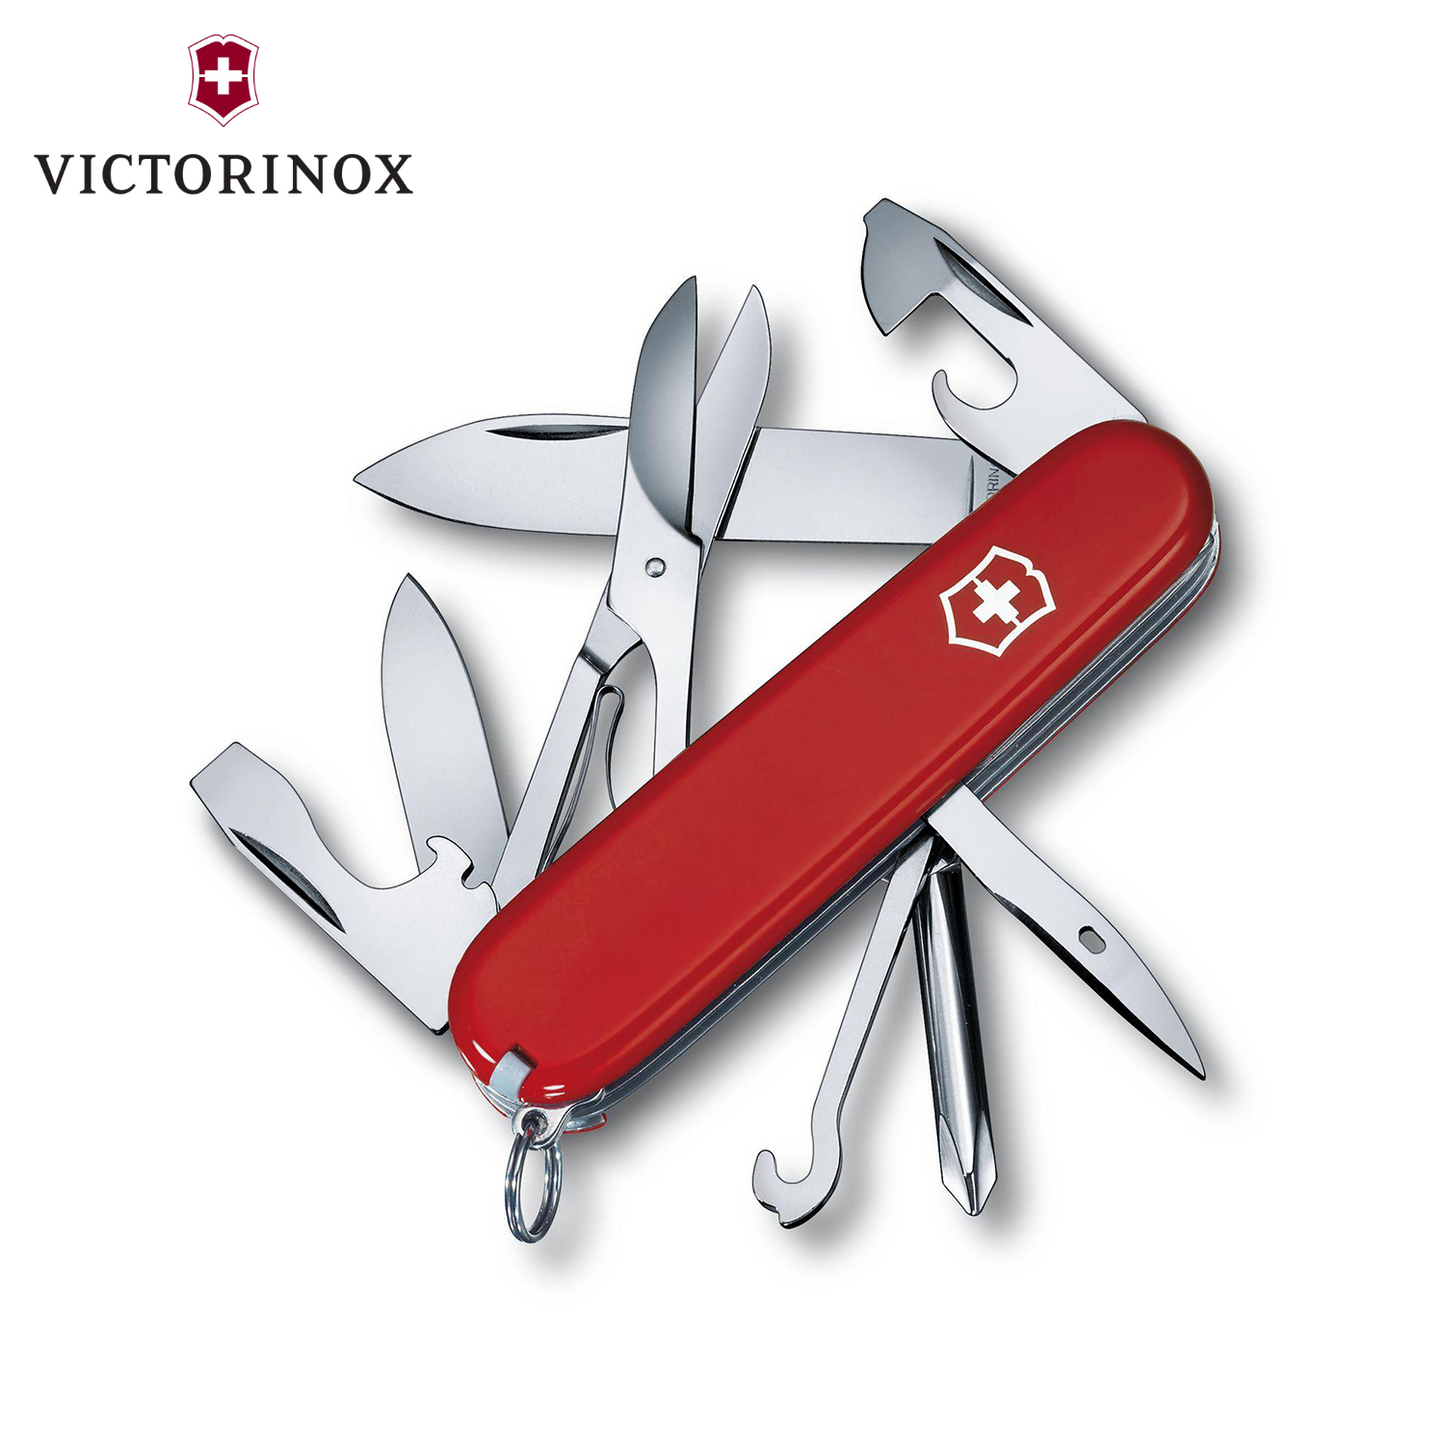 Victorinox Super Tinker Multi-Tool: The Ideal Choice for Handy People 